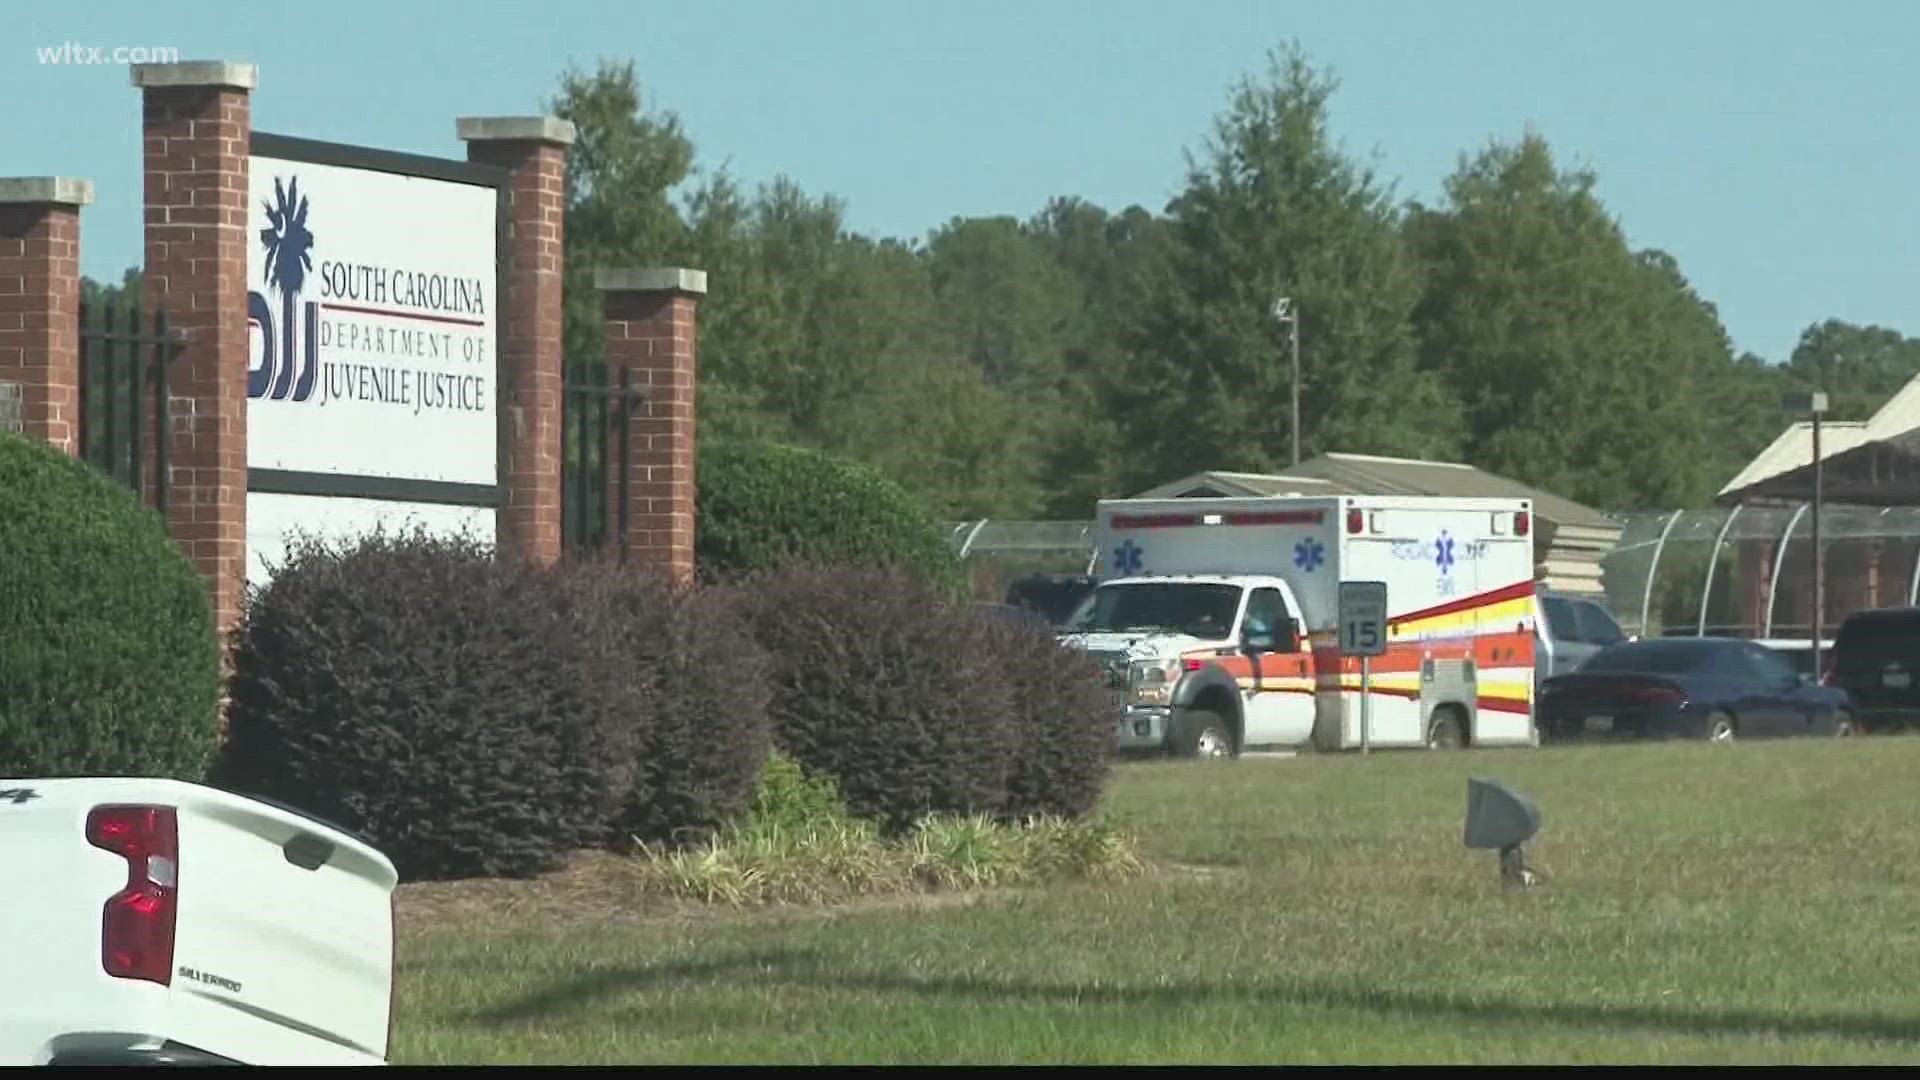 One day after the an incident at the DJJ facility on Broad River Road, a local lawmaker is speaking out about the issues within the department.